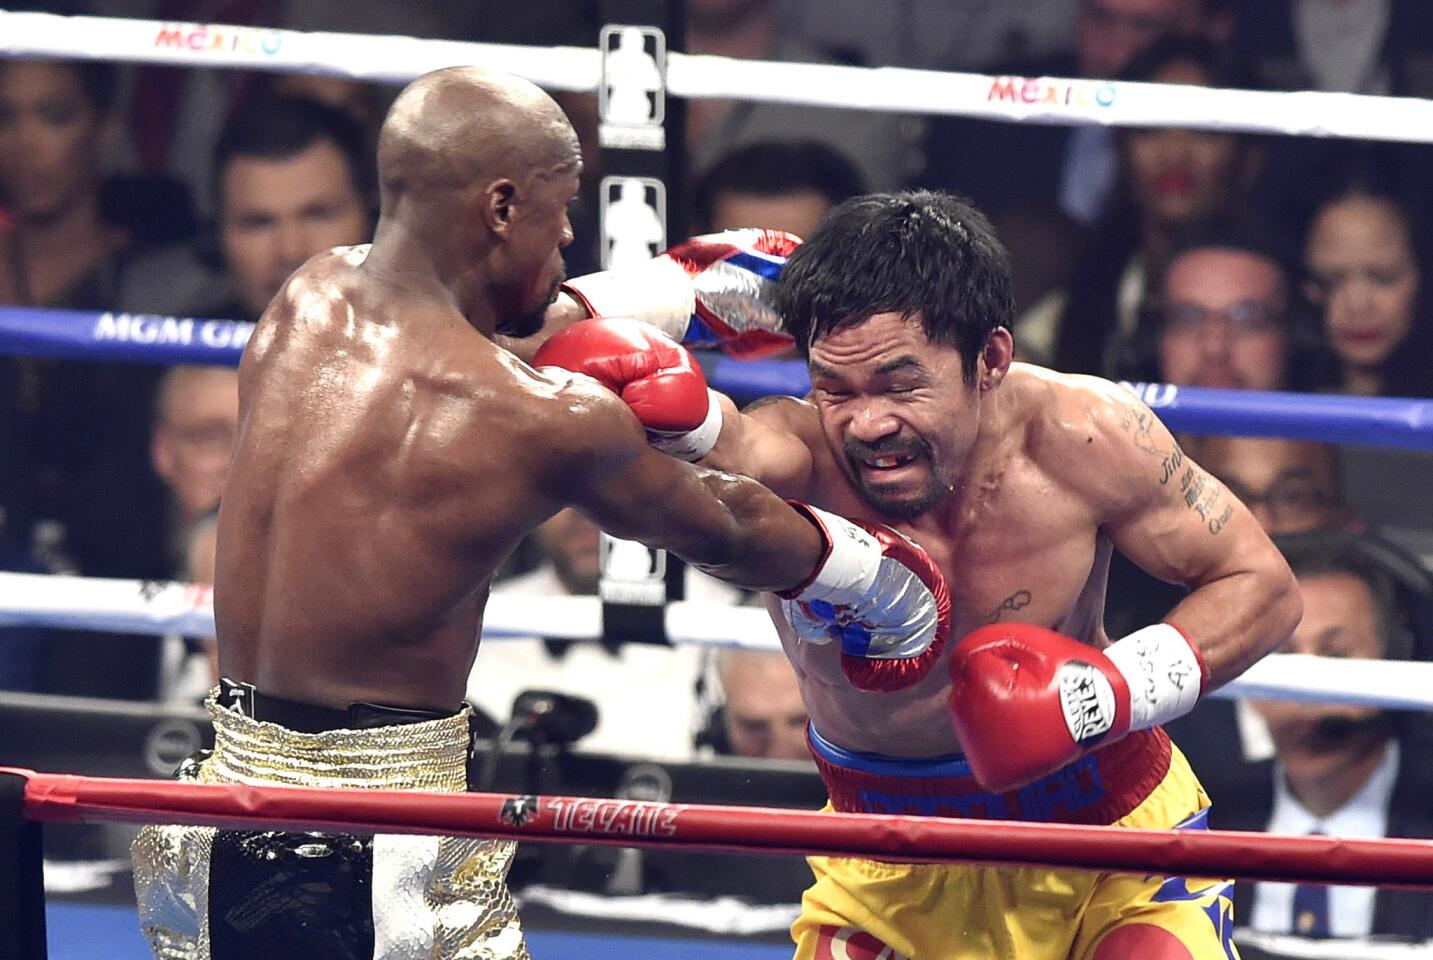 FLoyd Mayweather lands a punch against Manny Pacquaio during their 2015 bout in Las Vegas. Promoter Bob Arum says Pacquiao will finish his career with four fights this year, none of them against the retired Mayweather.